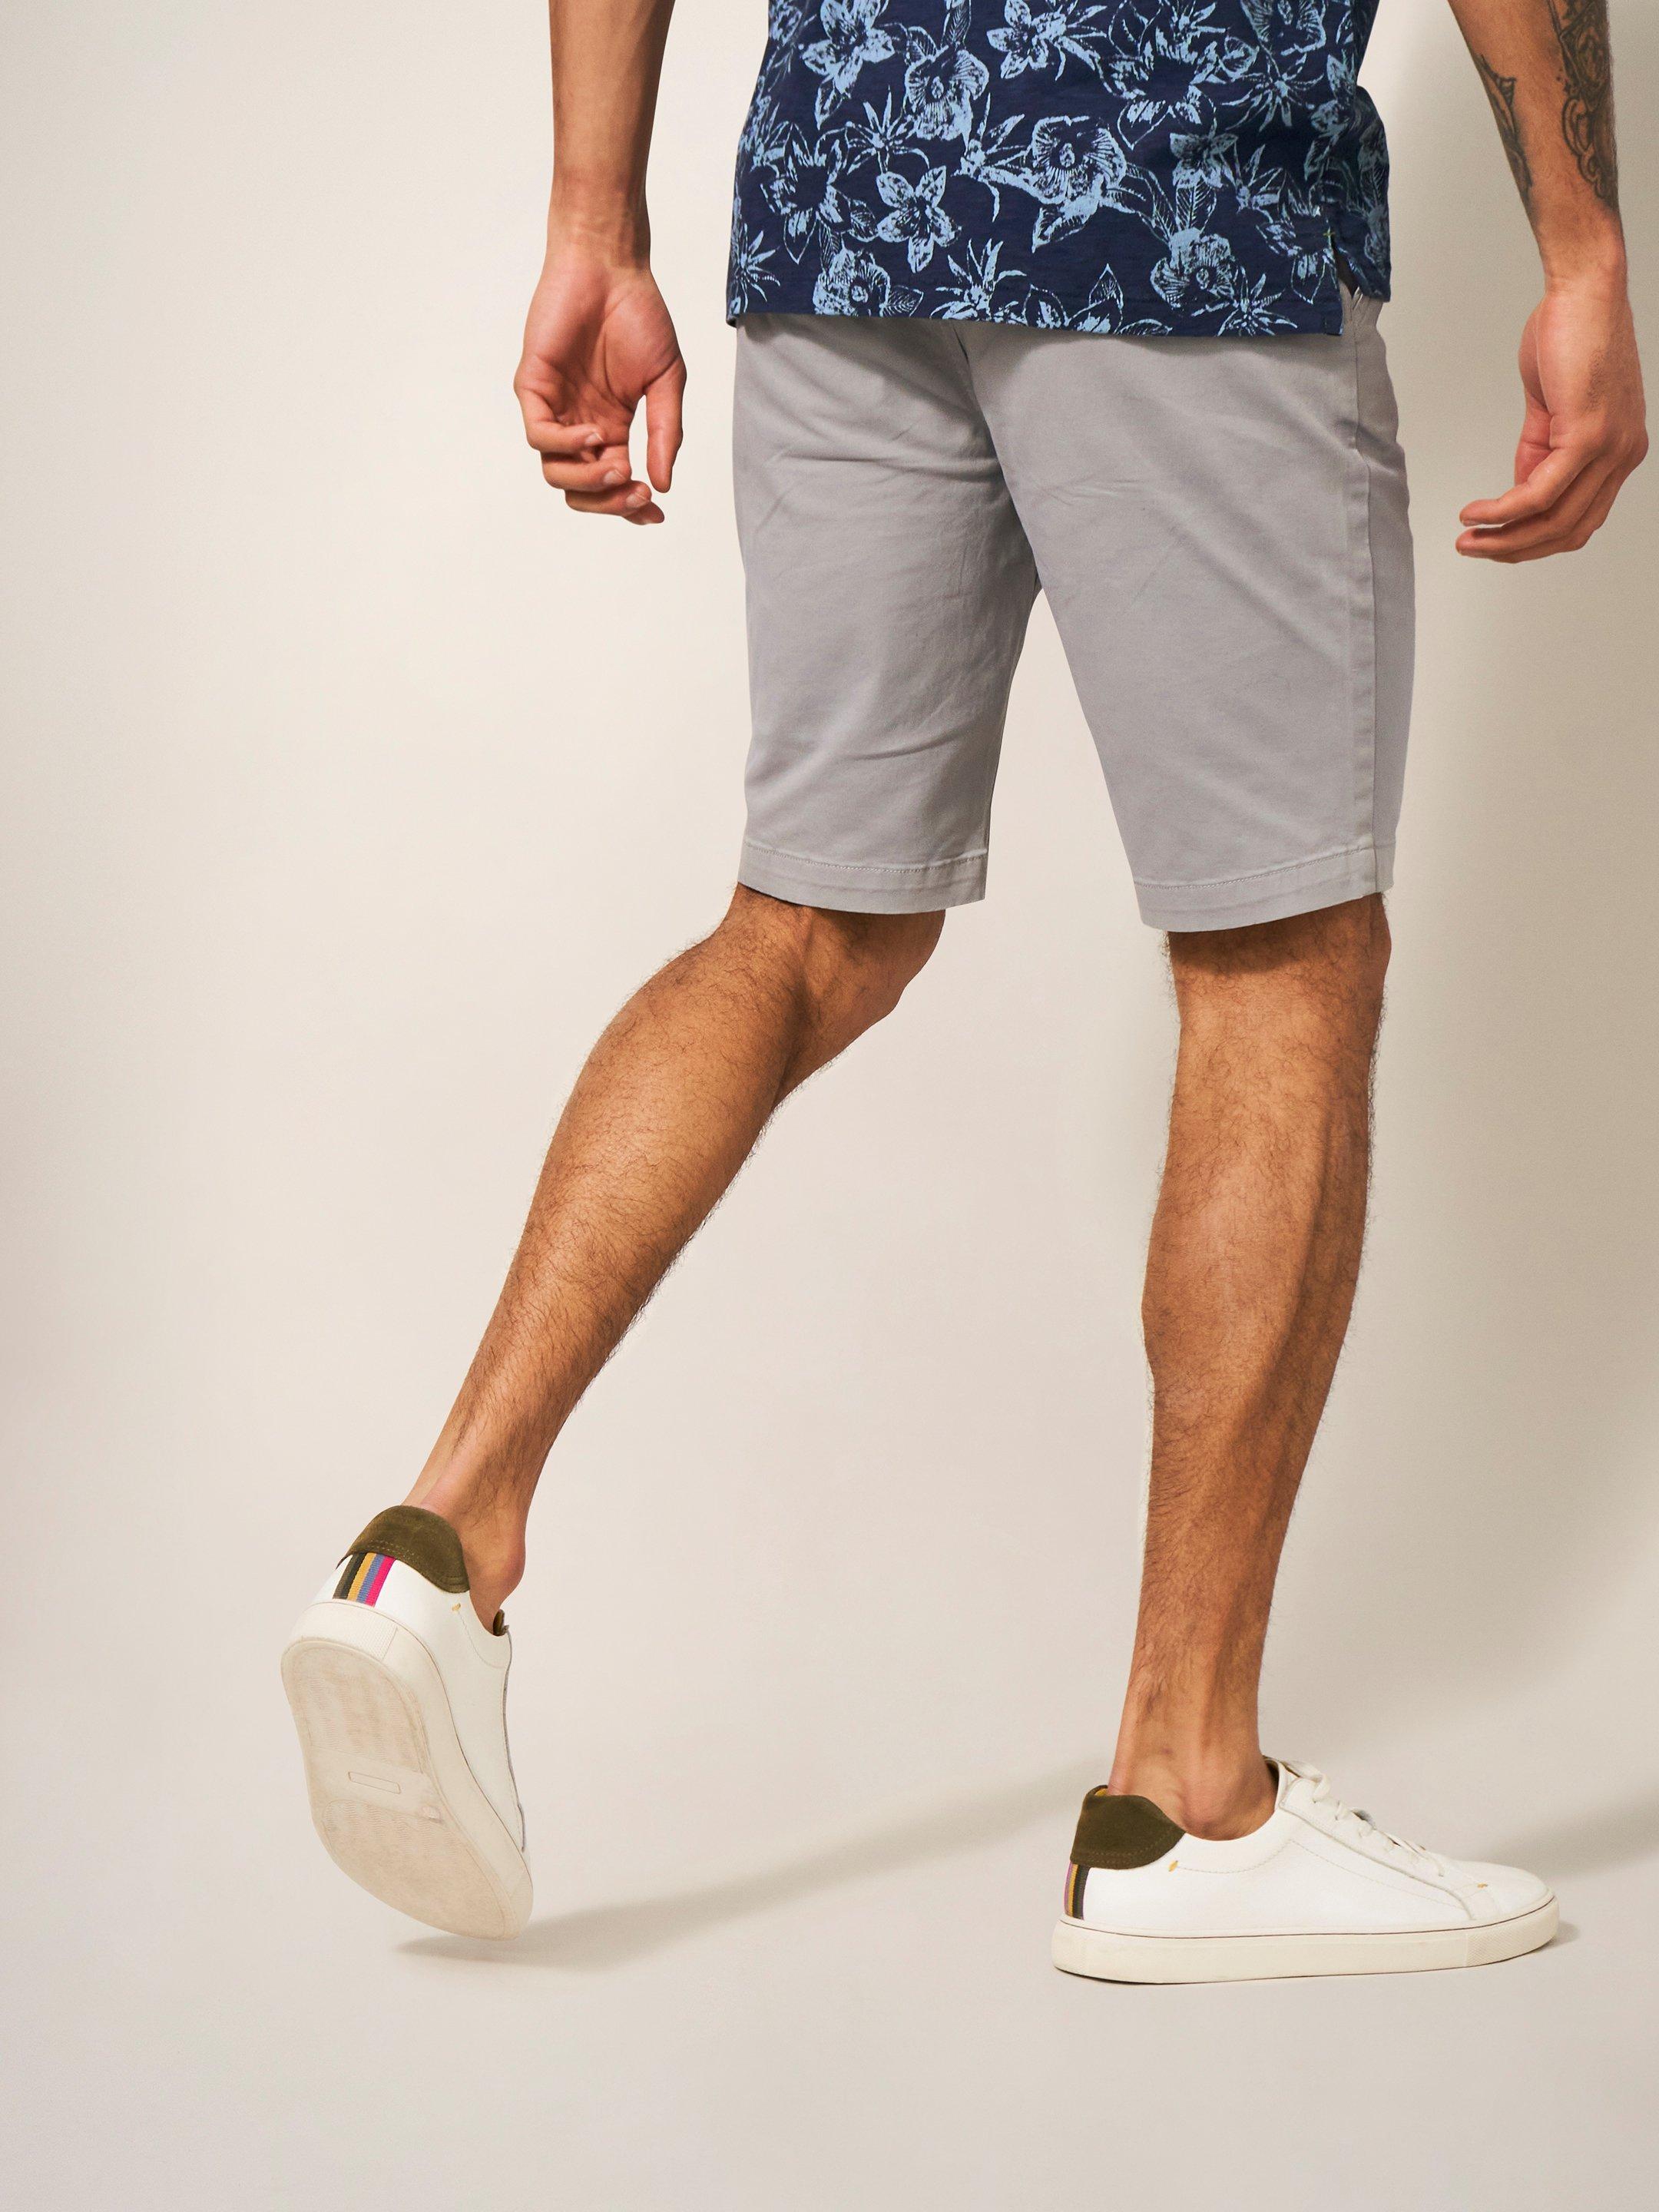 Sutton Slim Fit Chino Short in LGT GREY - MODEL BACK